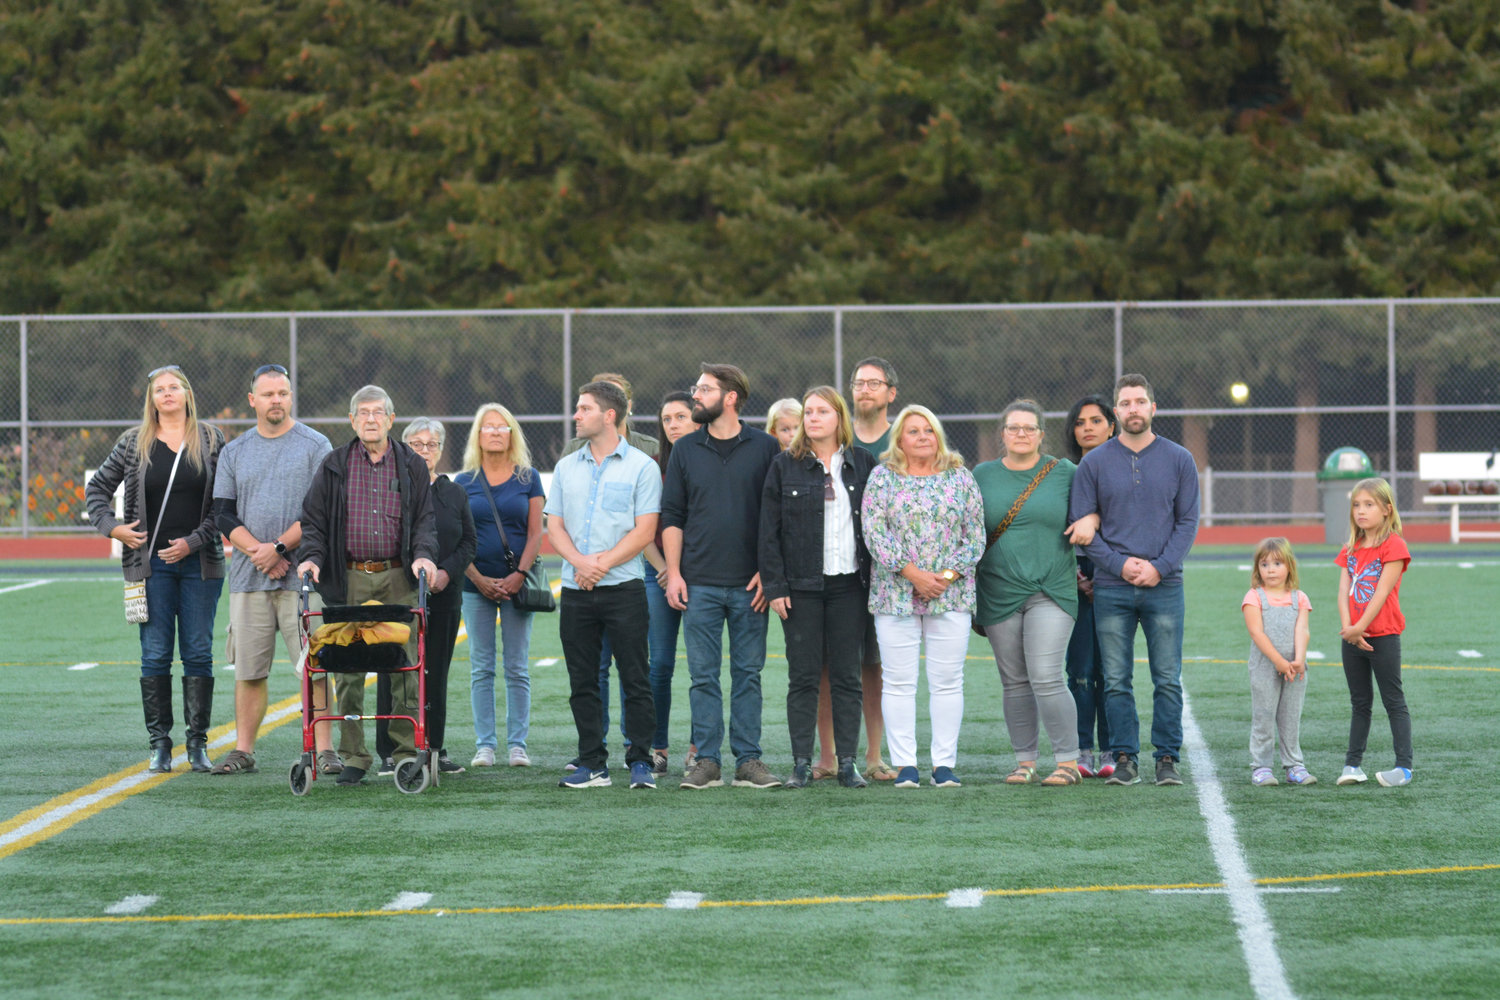 The Kain family stands near midfield prior to the celebration of life for Mike Kain on Sept. 29.